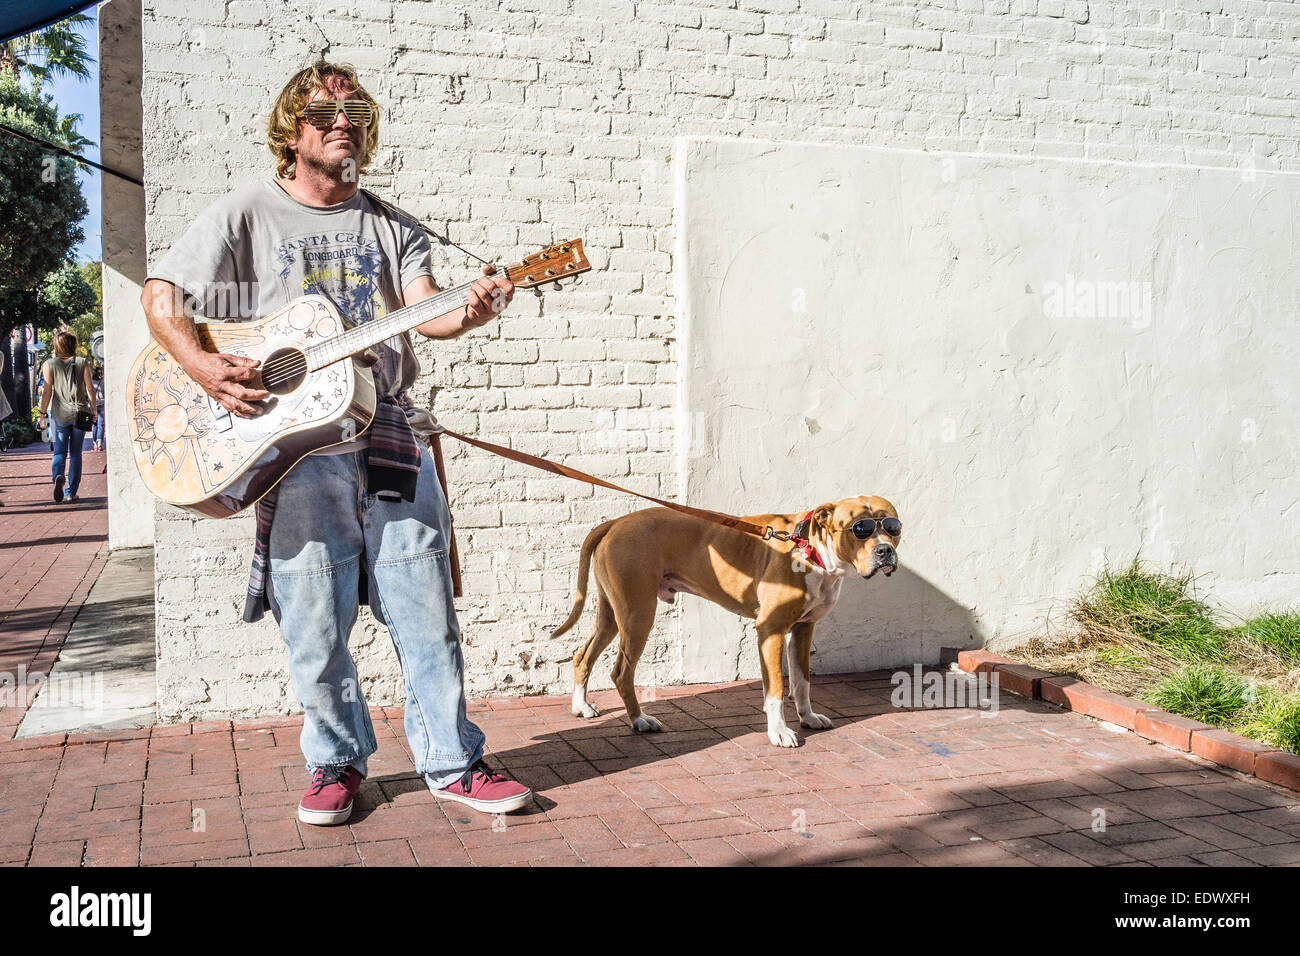 A guitar carrying man and his dog both wear sun glasses as they walk down State Street in Santa Barbara, California. Stock Photo